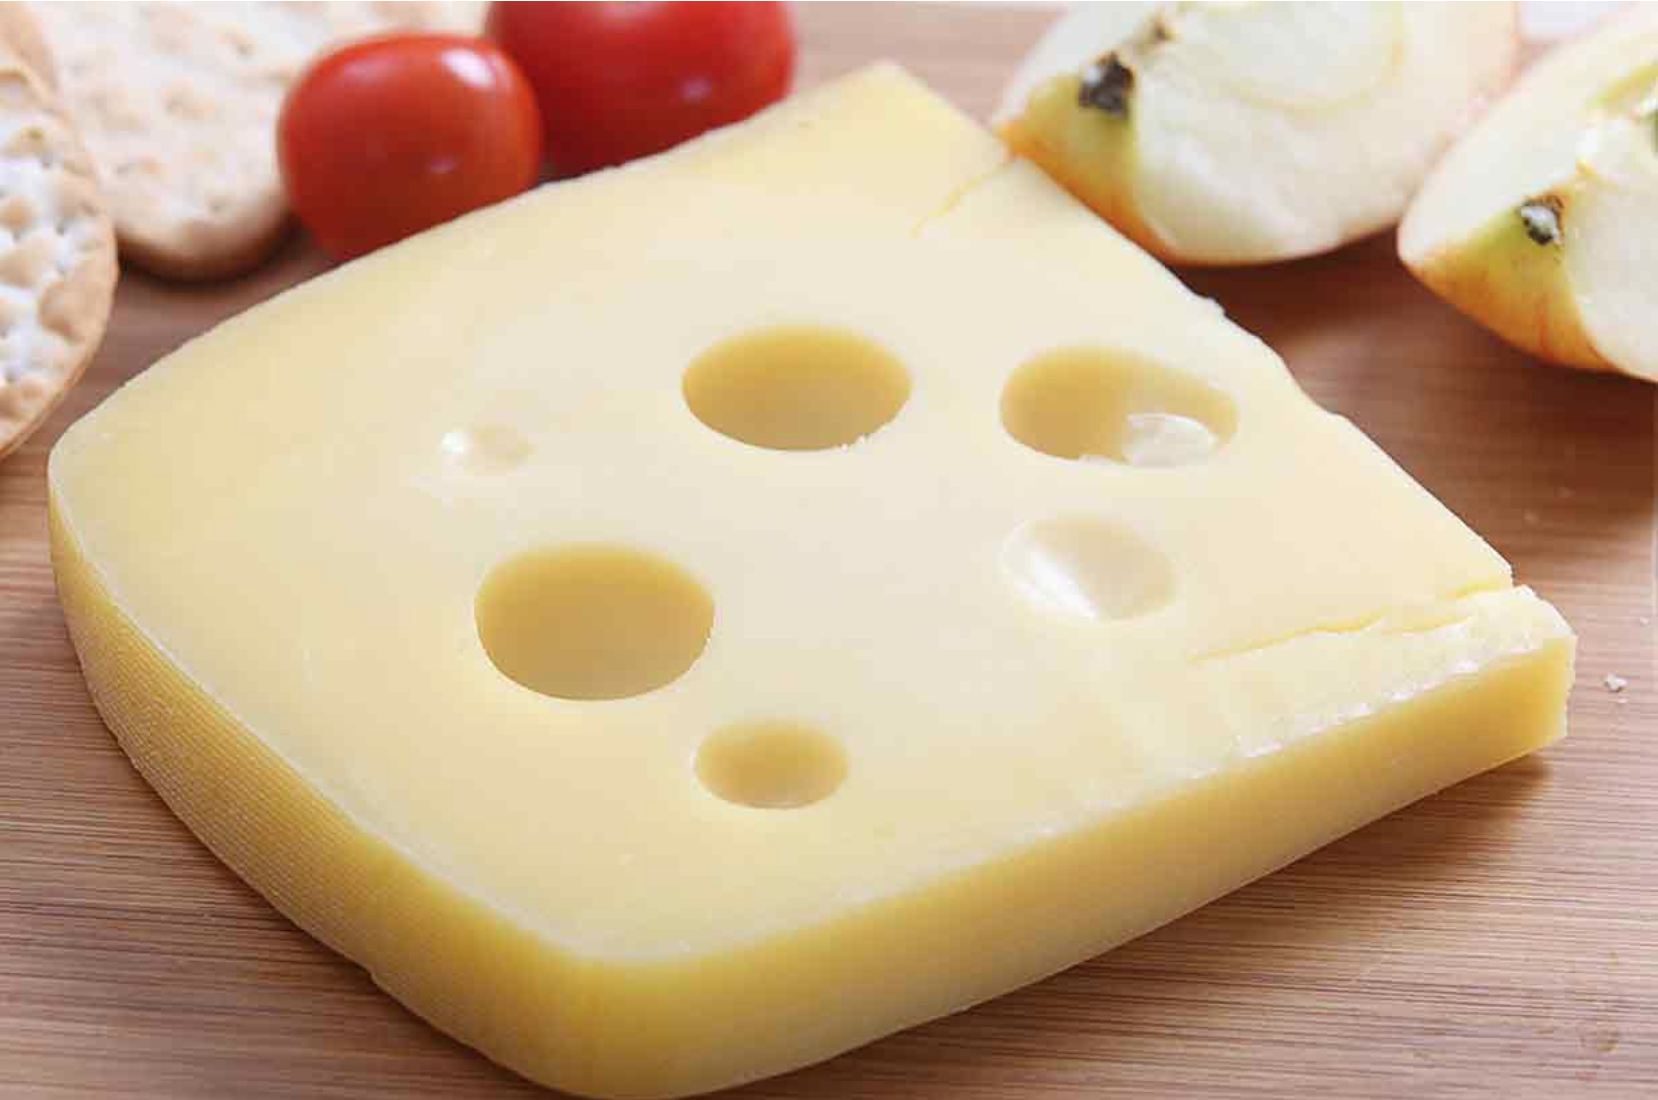 Jarlsberg Cheese Offers Significant Bone & Heart-Health Benefits Thanks To Vitamin K2, Says Study